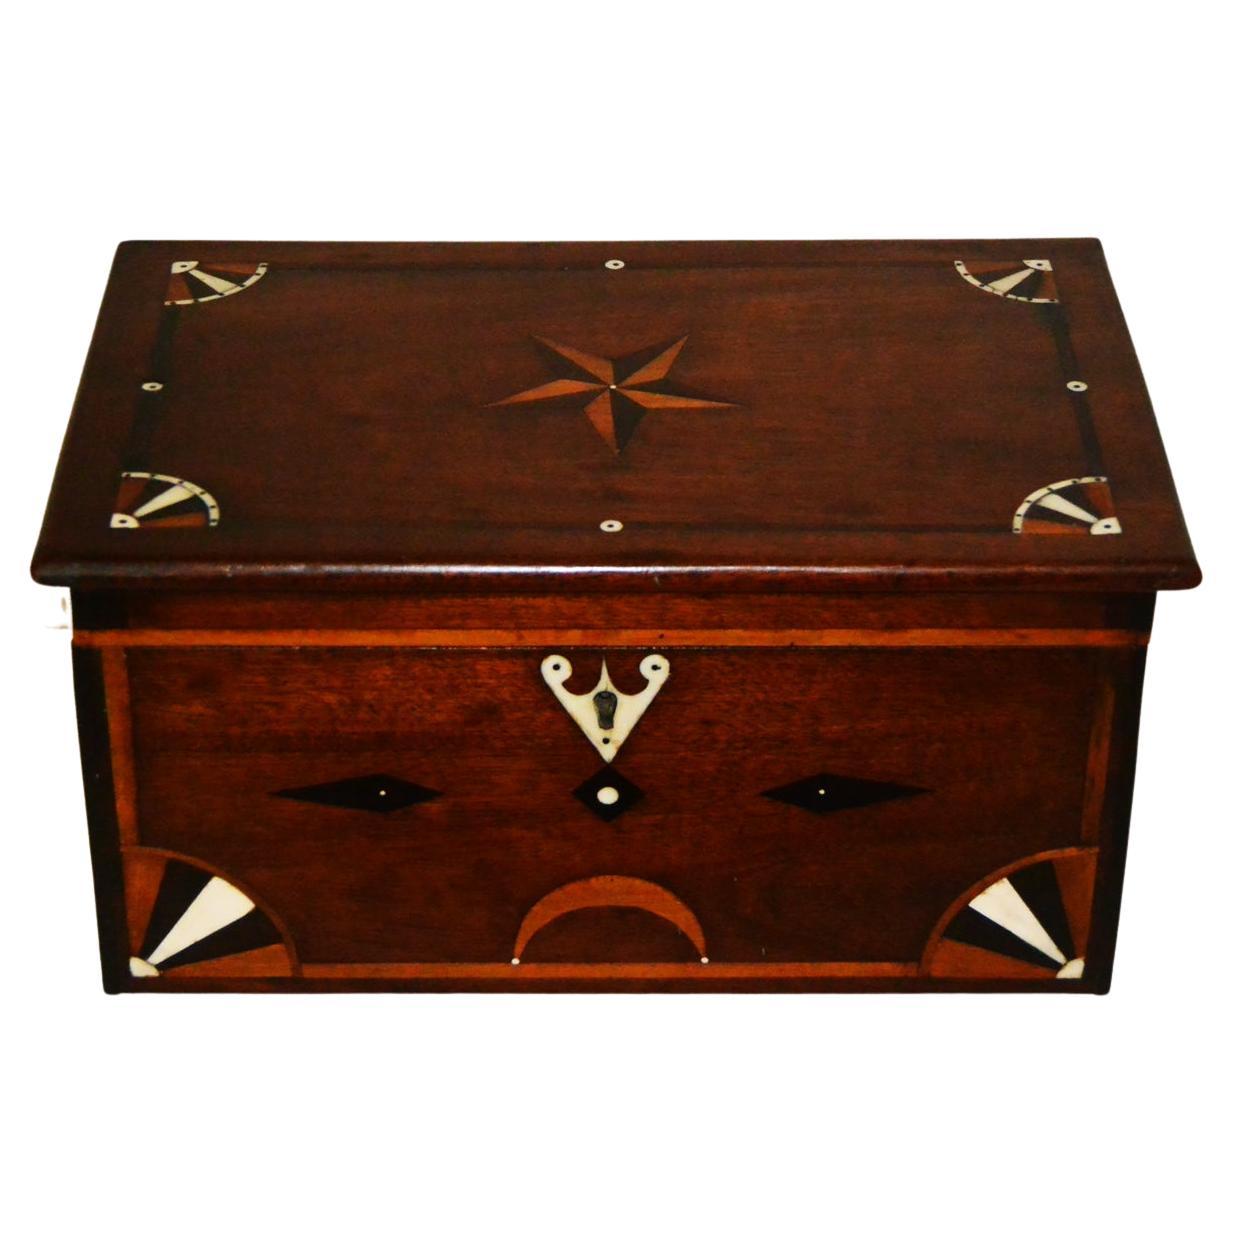 American Mid-19th Century Sailor Made Valuables Box with Extensive Inlays